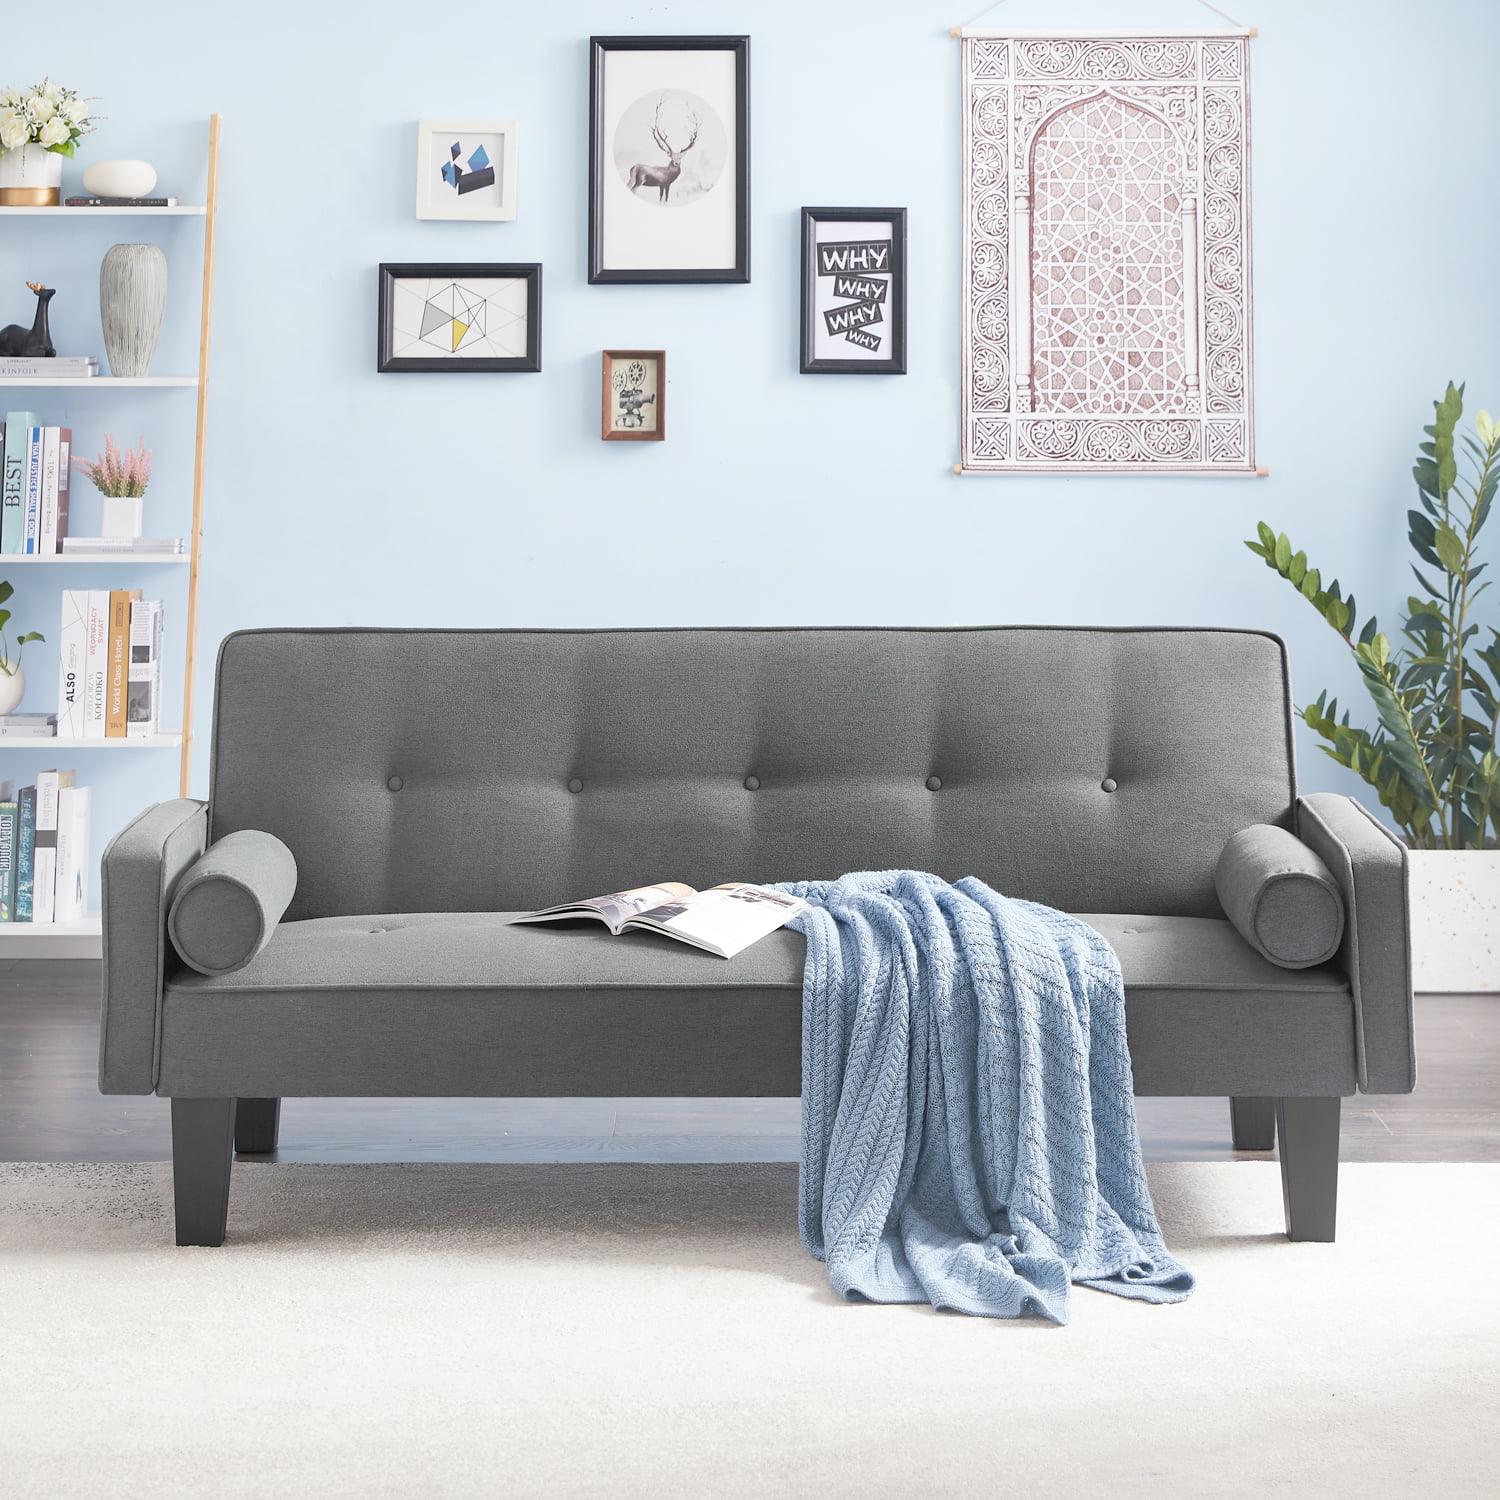 72" Futon Sofa Bed,Upholstered Folding Futon Fabric Couch,Recliner Size Futon Bed Removable Armrests,Modern Sofa for Compact Living Space,Apartment,Gray - Walmart.com